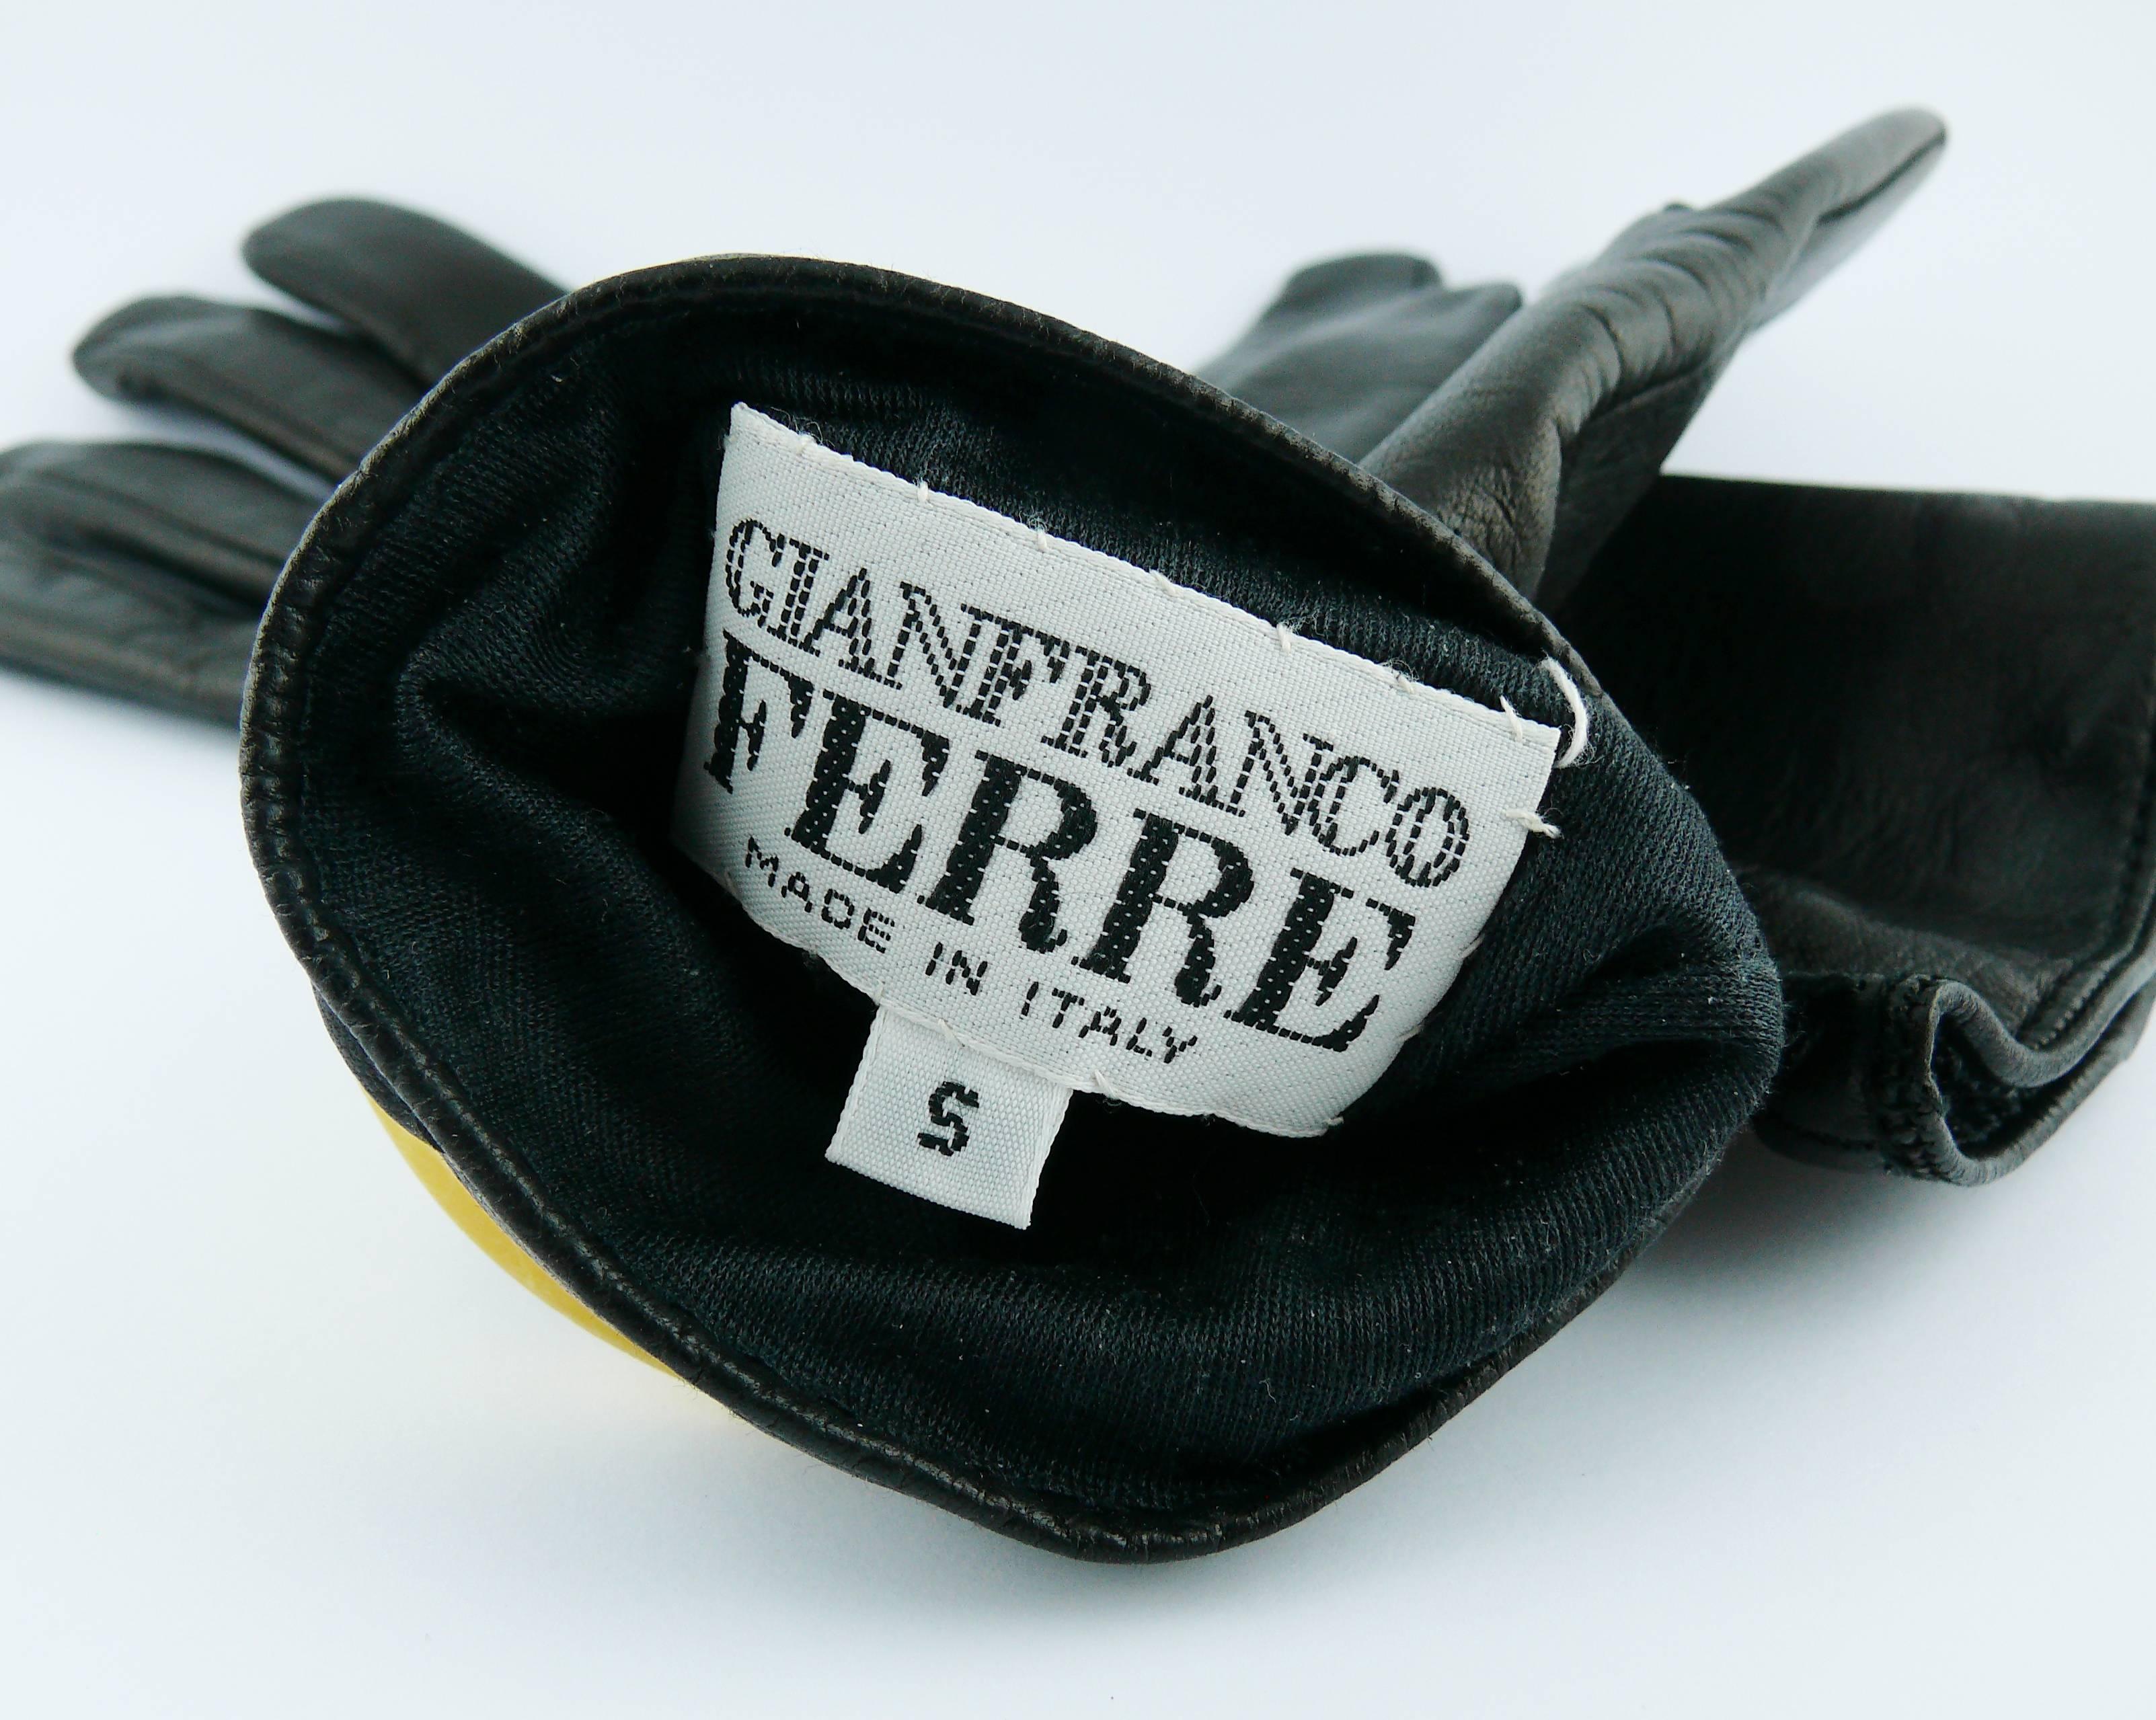 Gianfranco Ferre Vintage Black Leather and Gold Buckle Gloves Size S 1